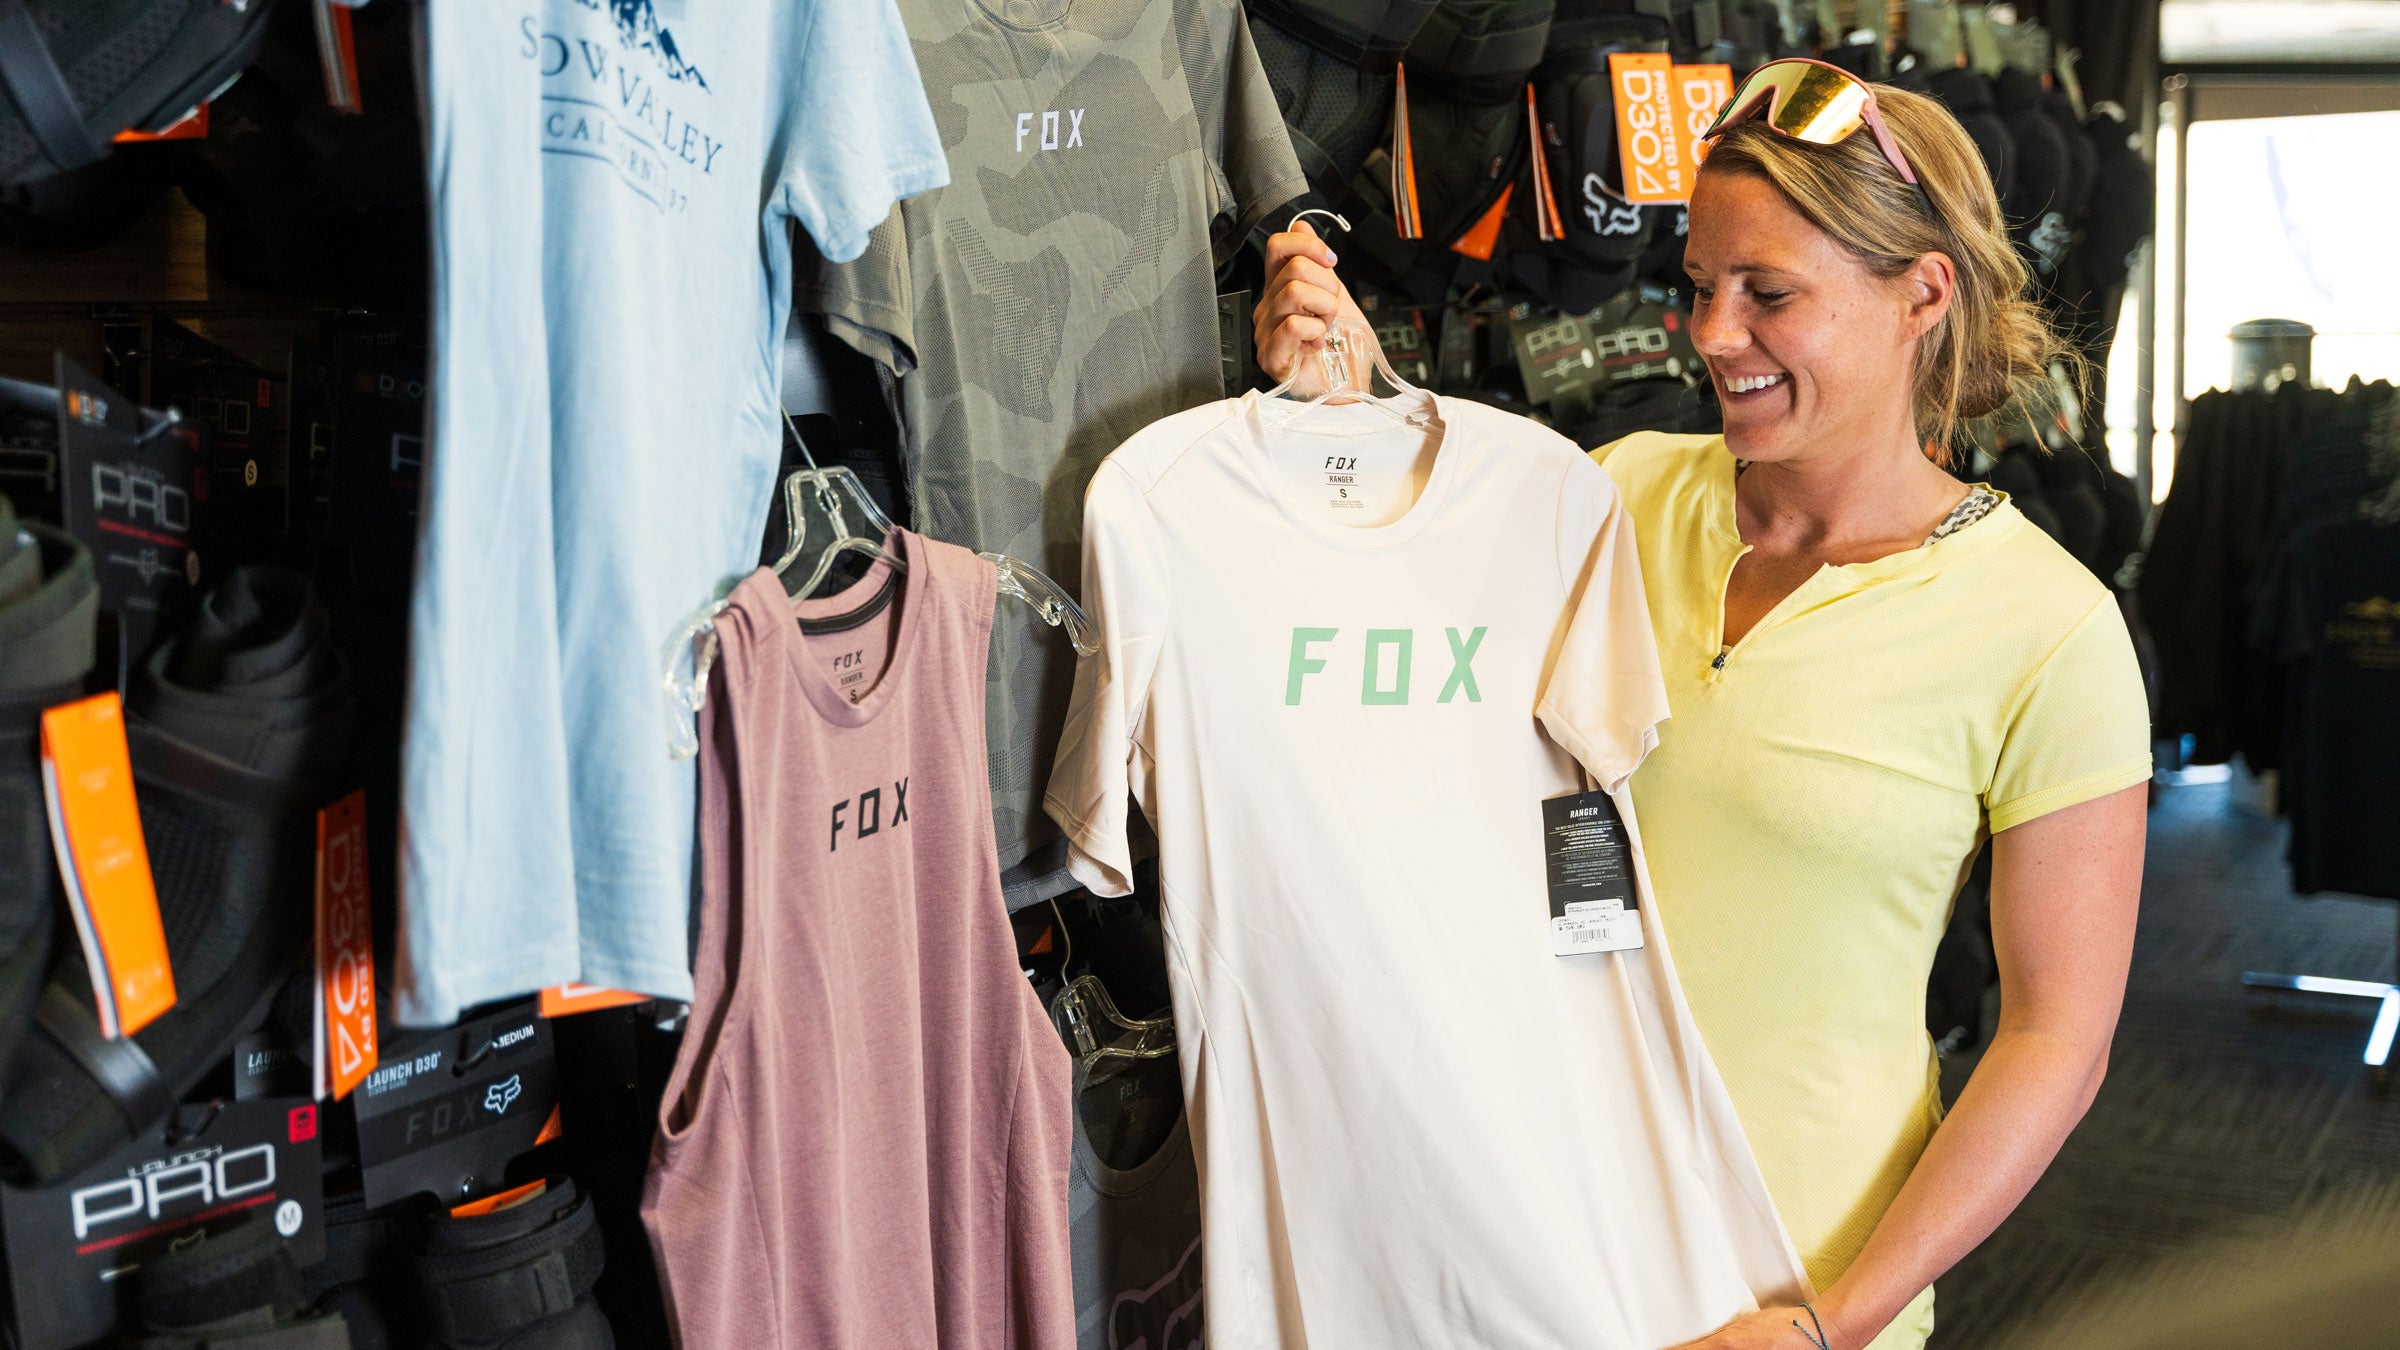 An adult holding up a beige Fox clothing shirt inside the Sports Shop at Snow Valley.